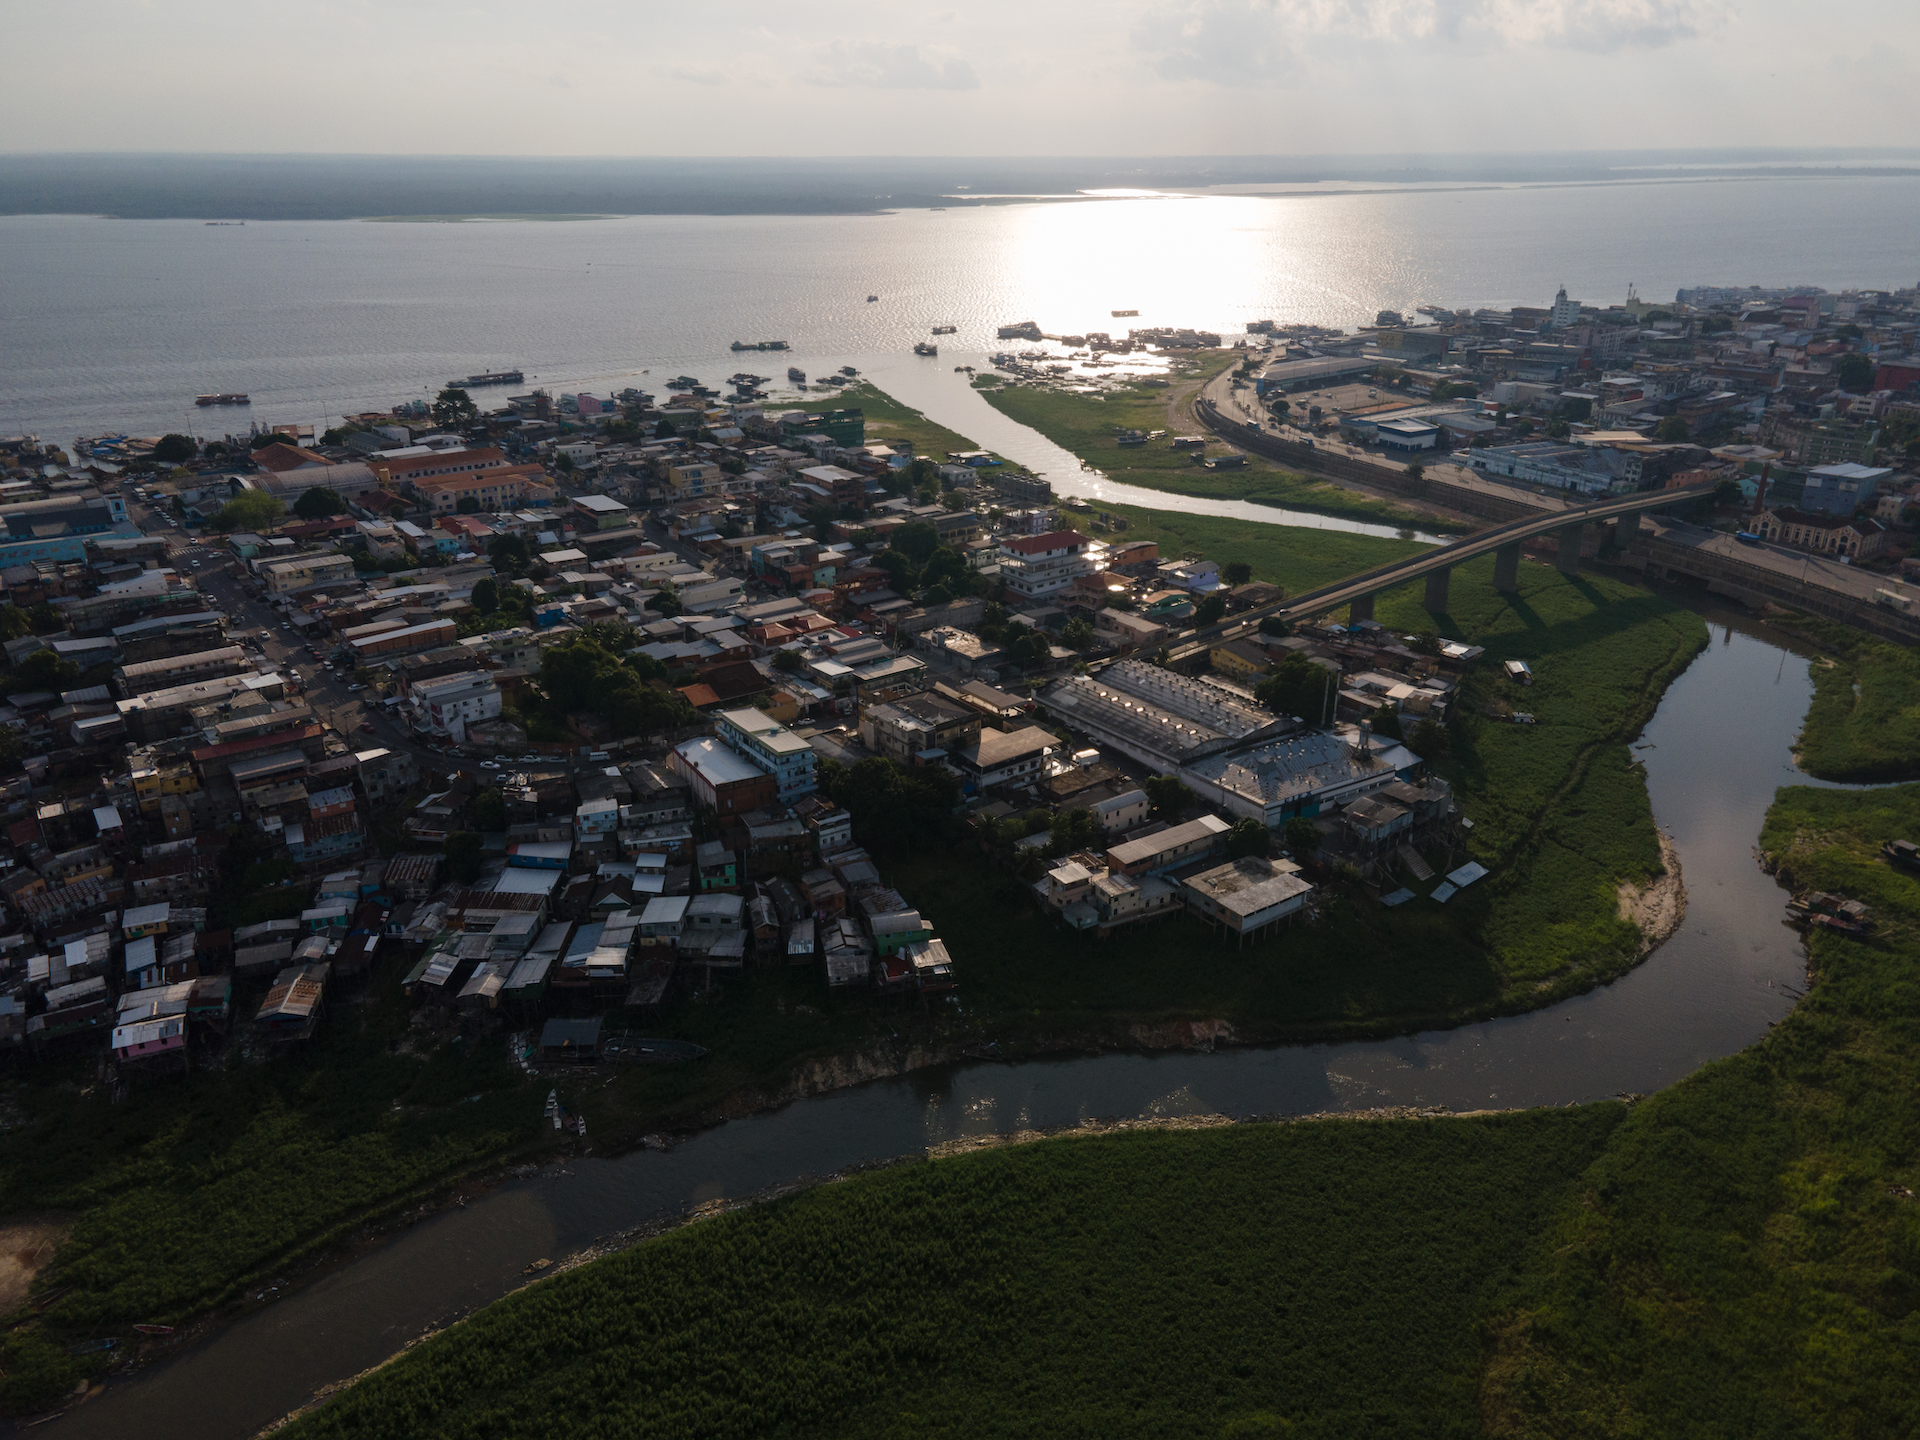 Educandos is a tributary of the Rio Negro